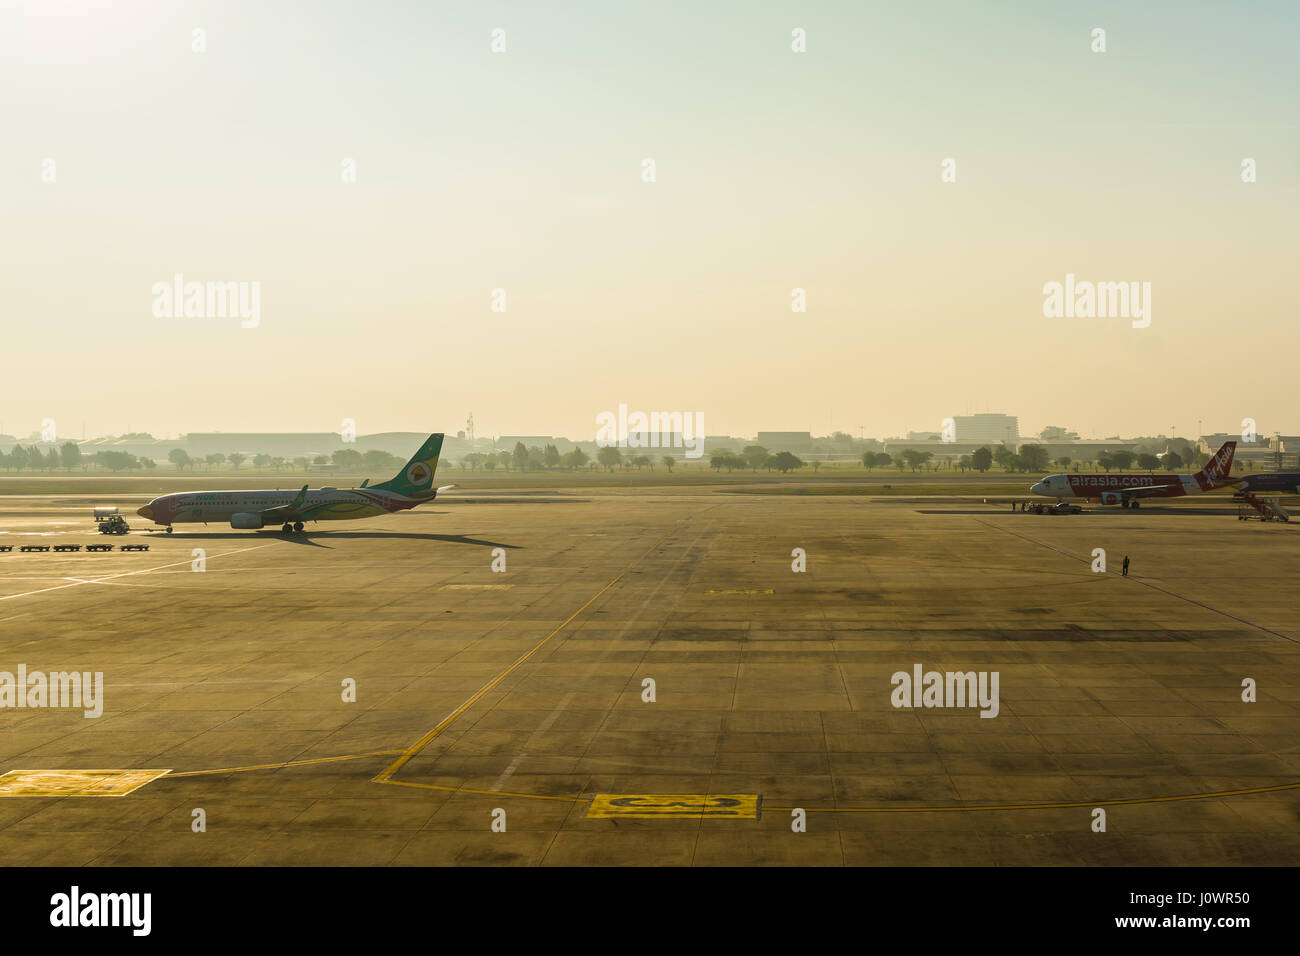 Bangkok, Thailand - March 19, 2017: Don Muang International Airport. Parking Airplanes at airport during boarding operations. They are few planes on a Stock Photo